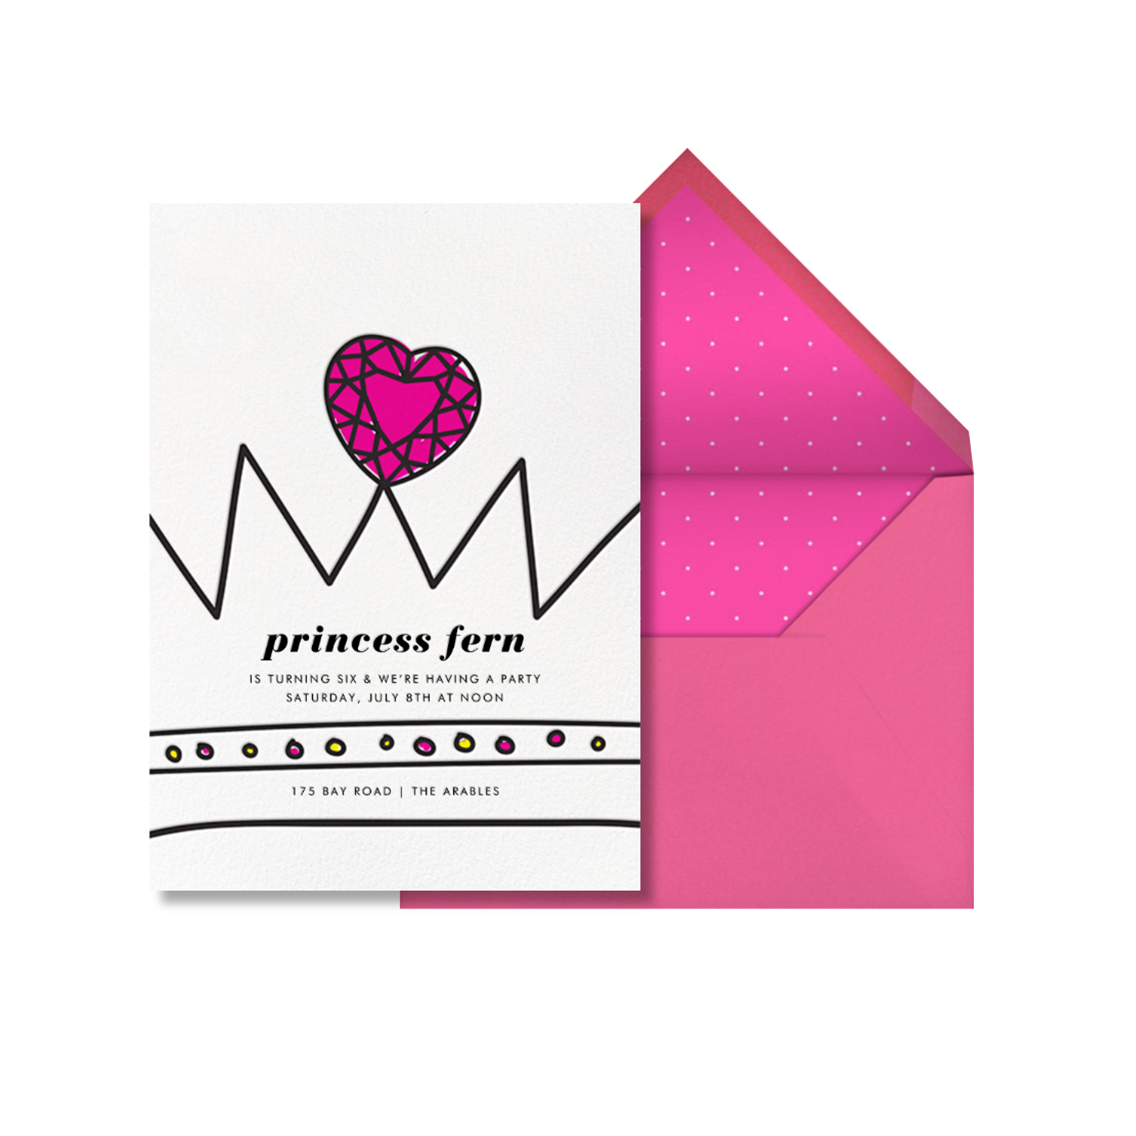 PP_kidsbirthday-mockups_0017_crowning-achievement.png